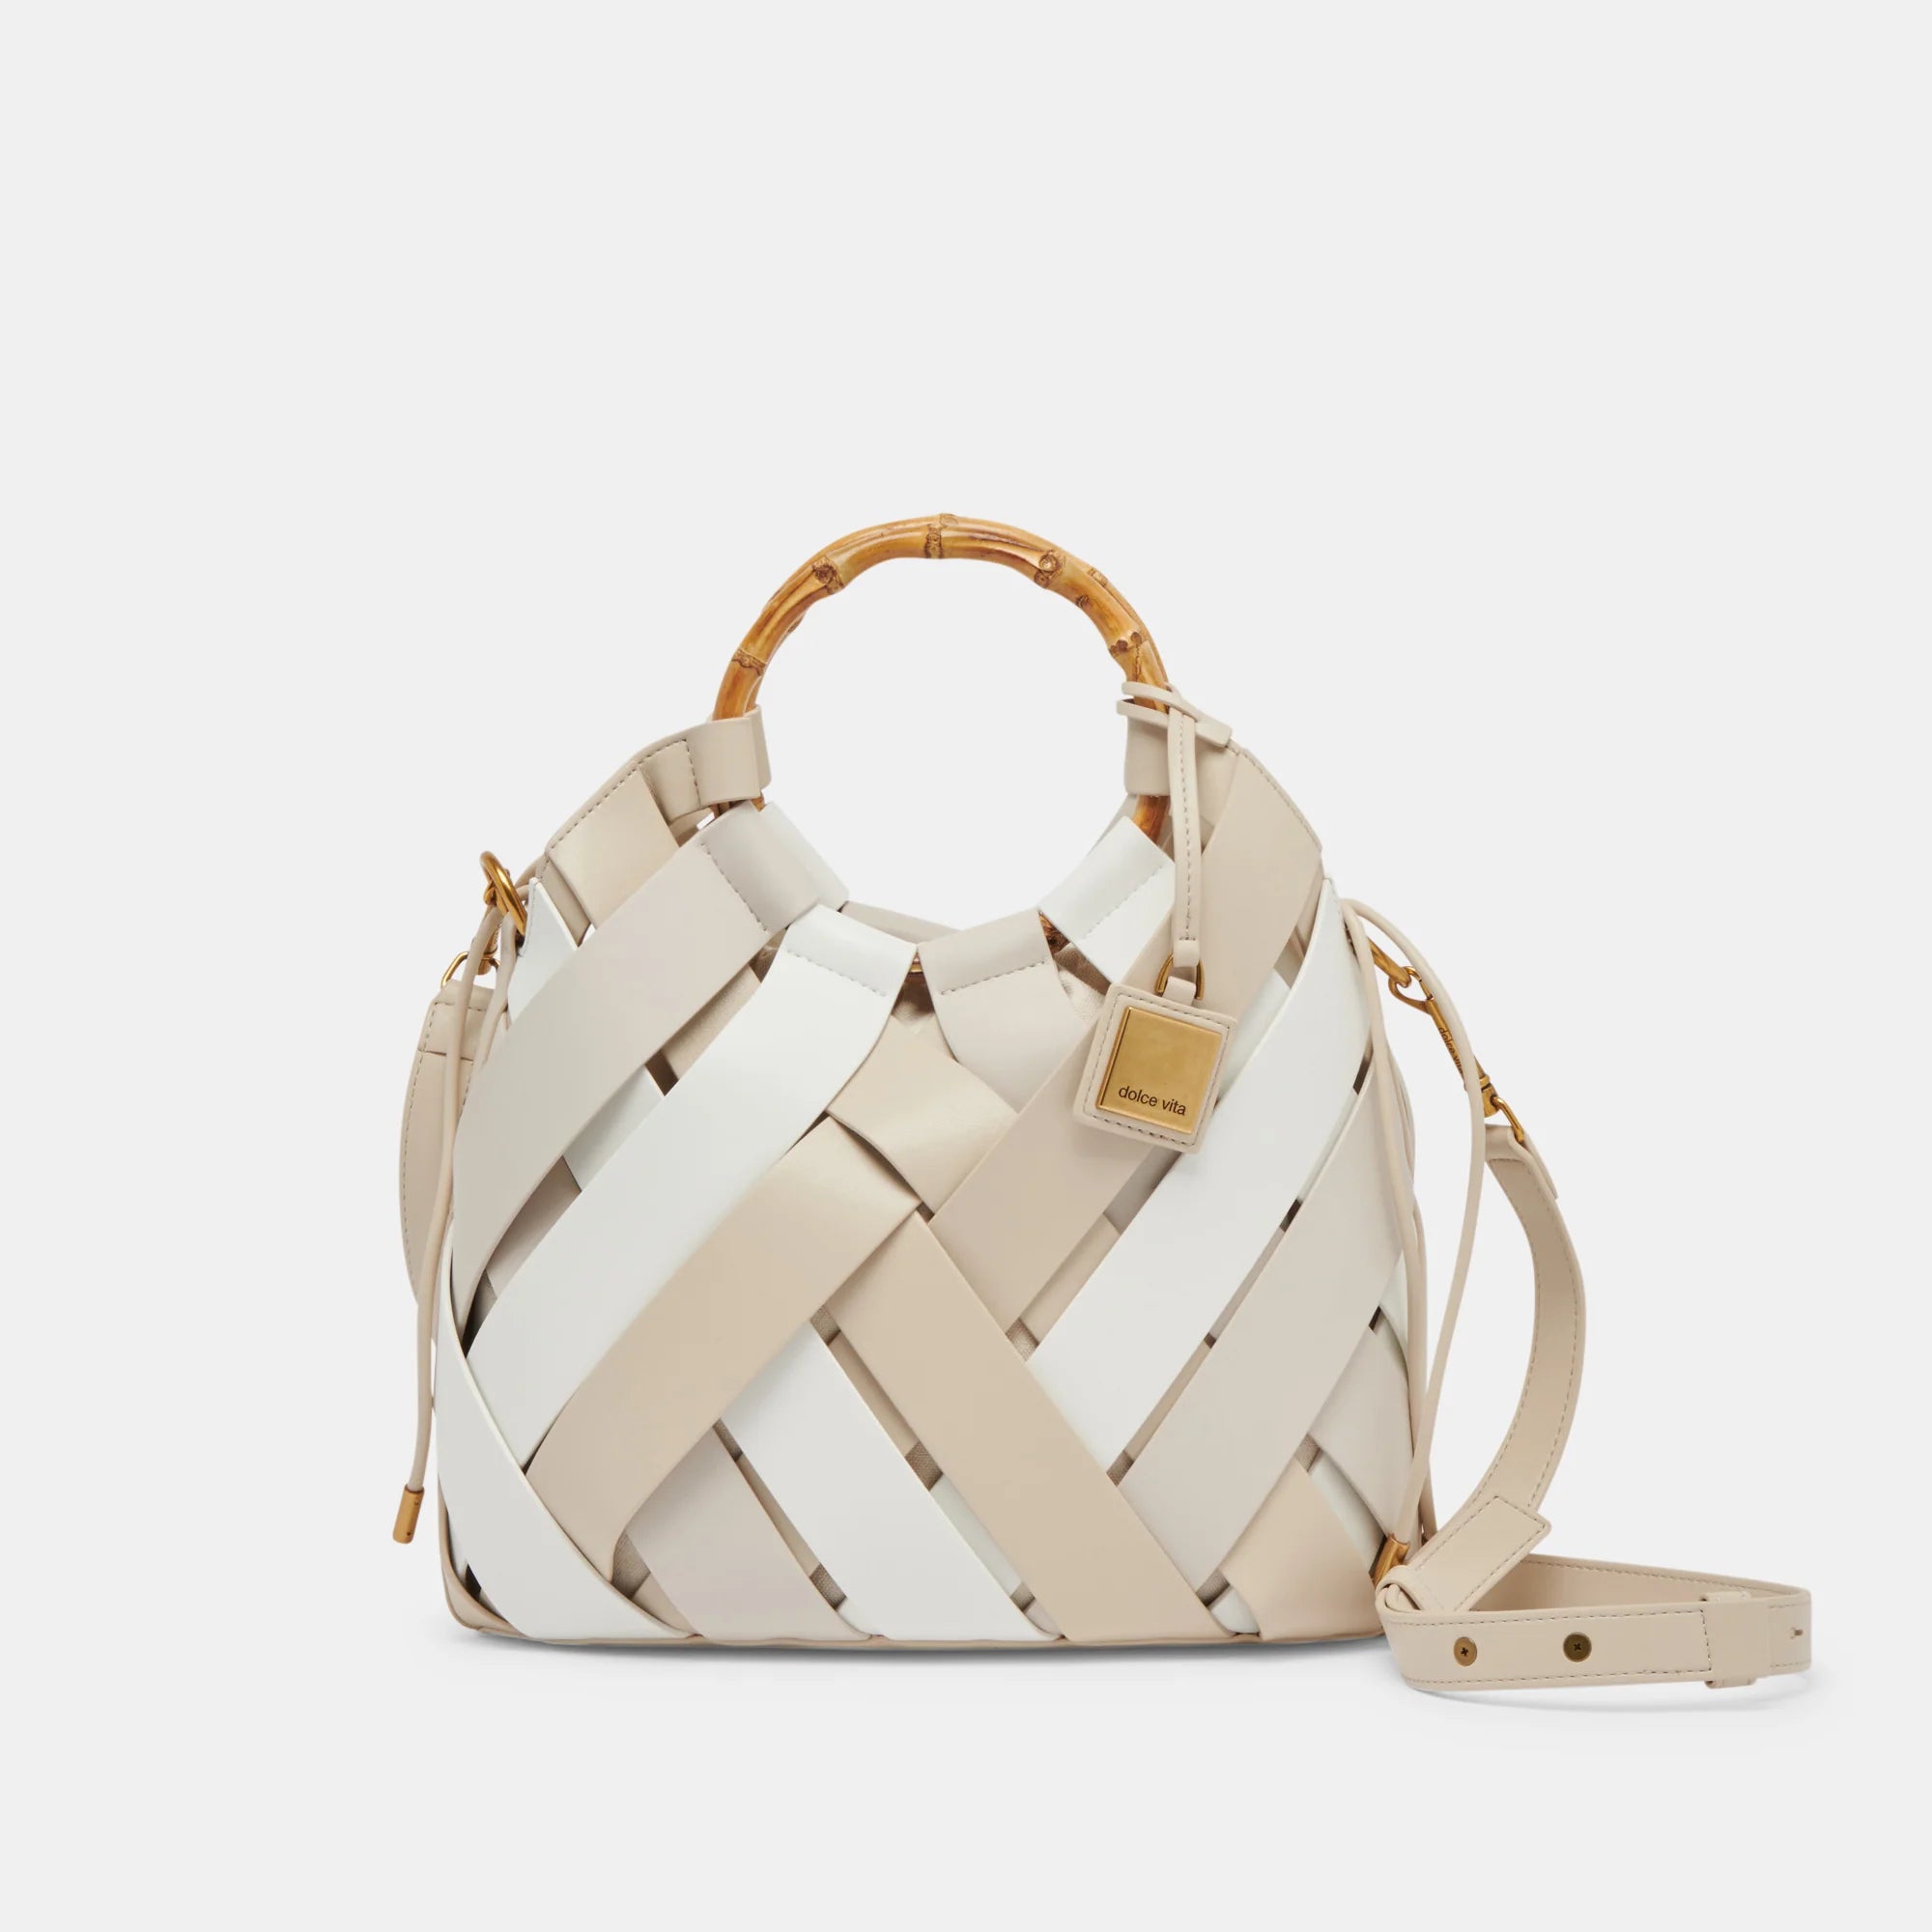 SIENNA IVORY FAUX LEATHER